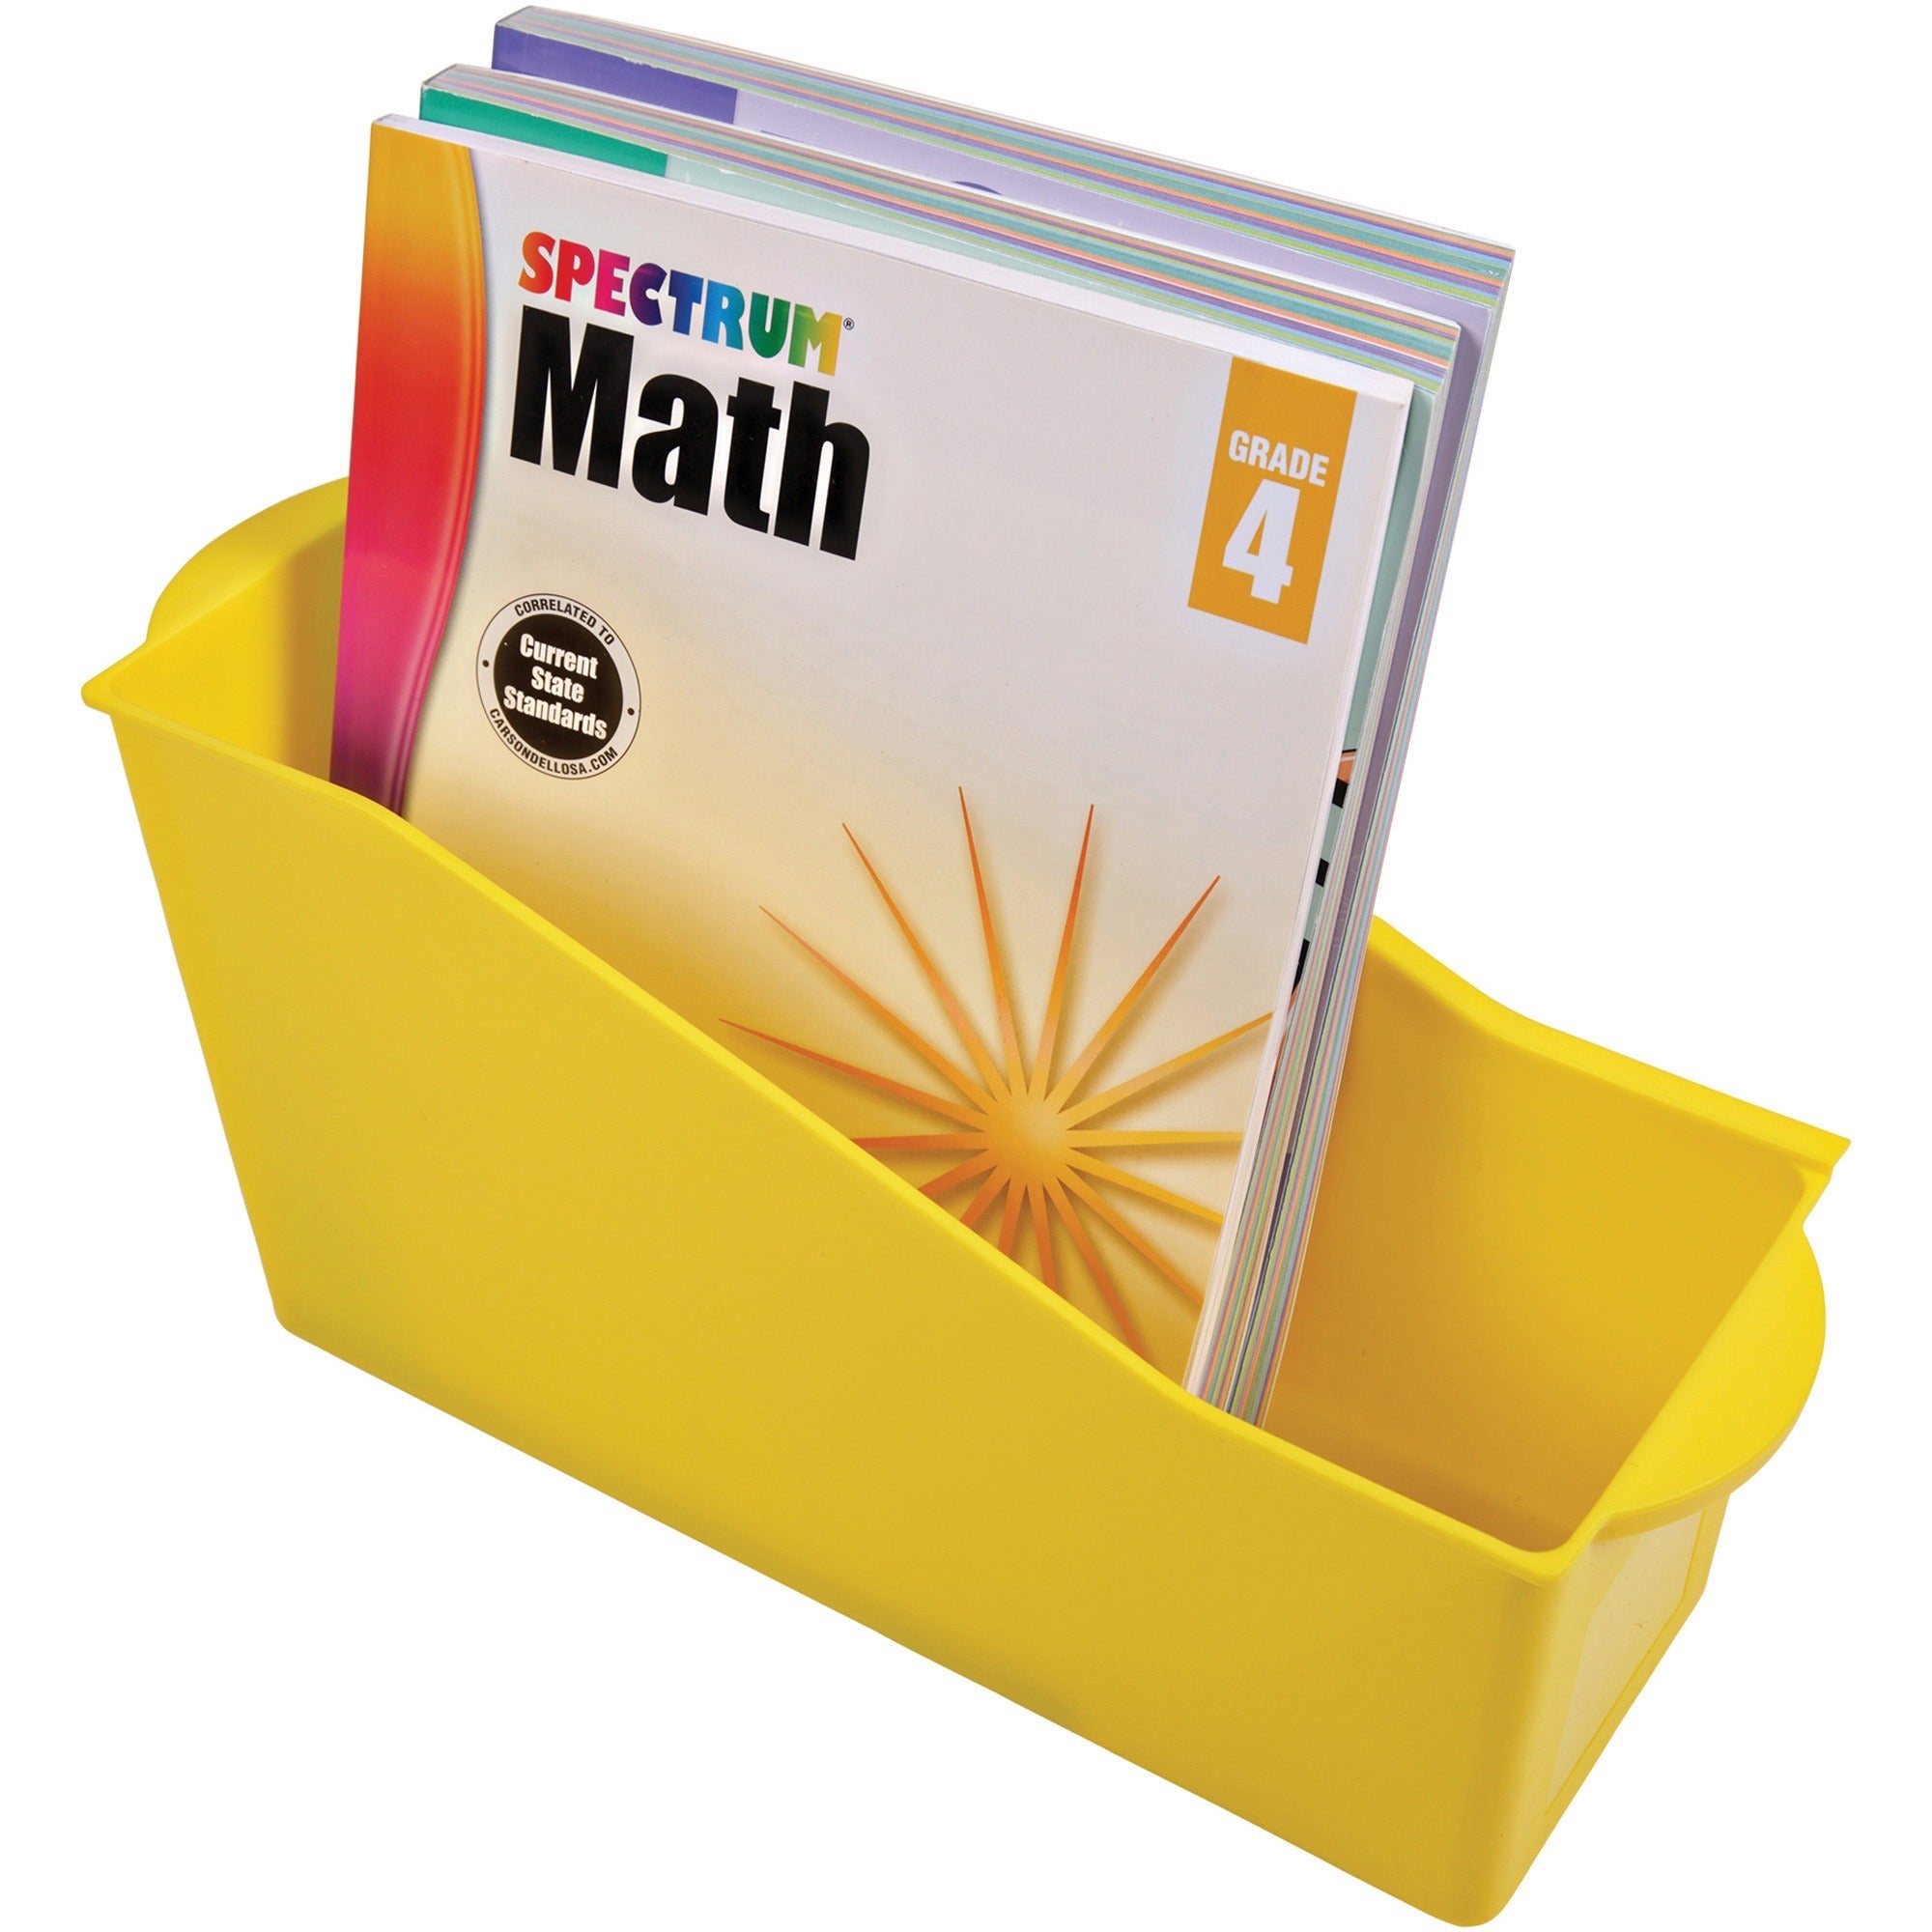 deflecto-antimicrobial-kids-book-bin-74-height-x-142-width-x-53-depth-antimicrobial-lightweight-portable-mold-resistant-mildew-resistant-stackable-handle-yellow-polypropylene-1-each_def39508yel - 1